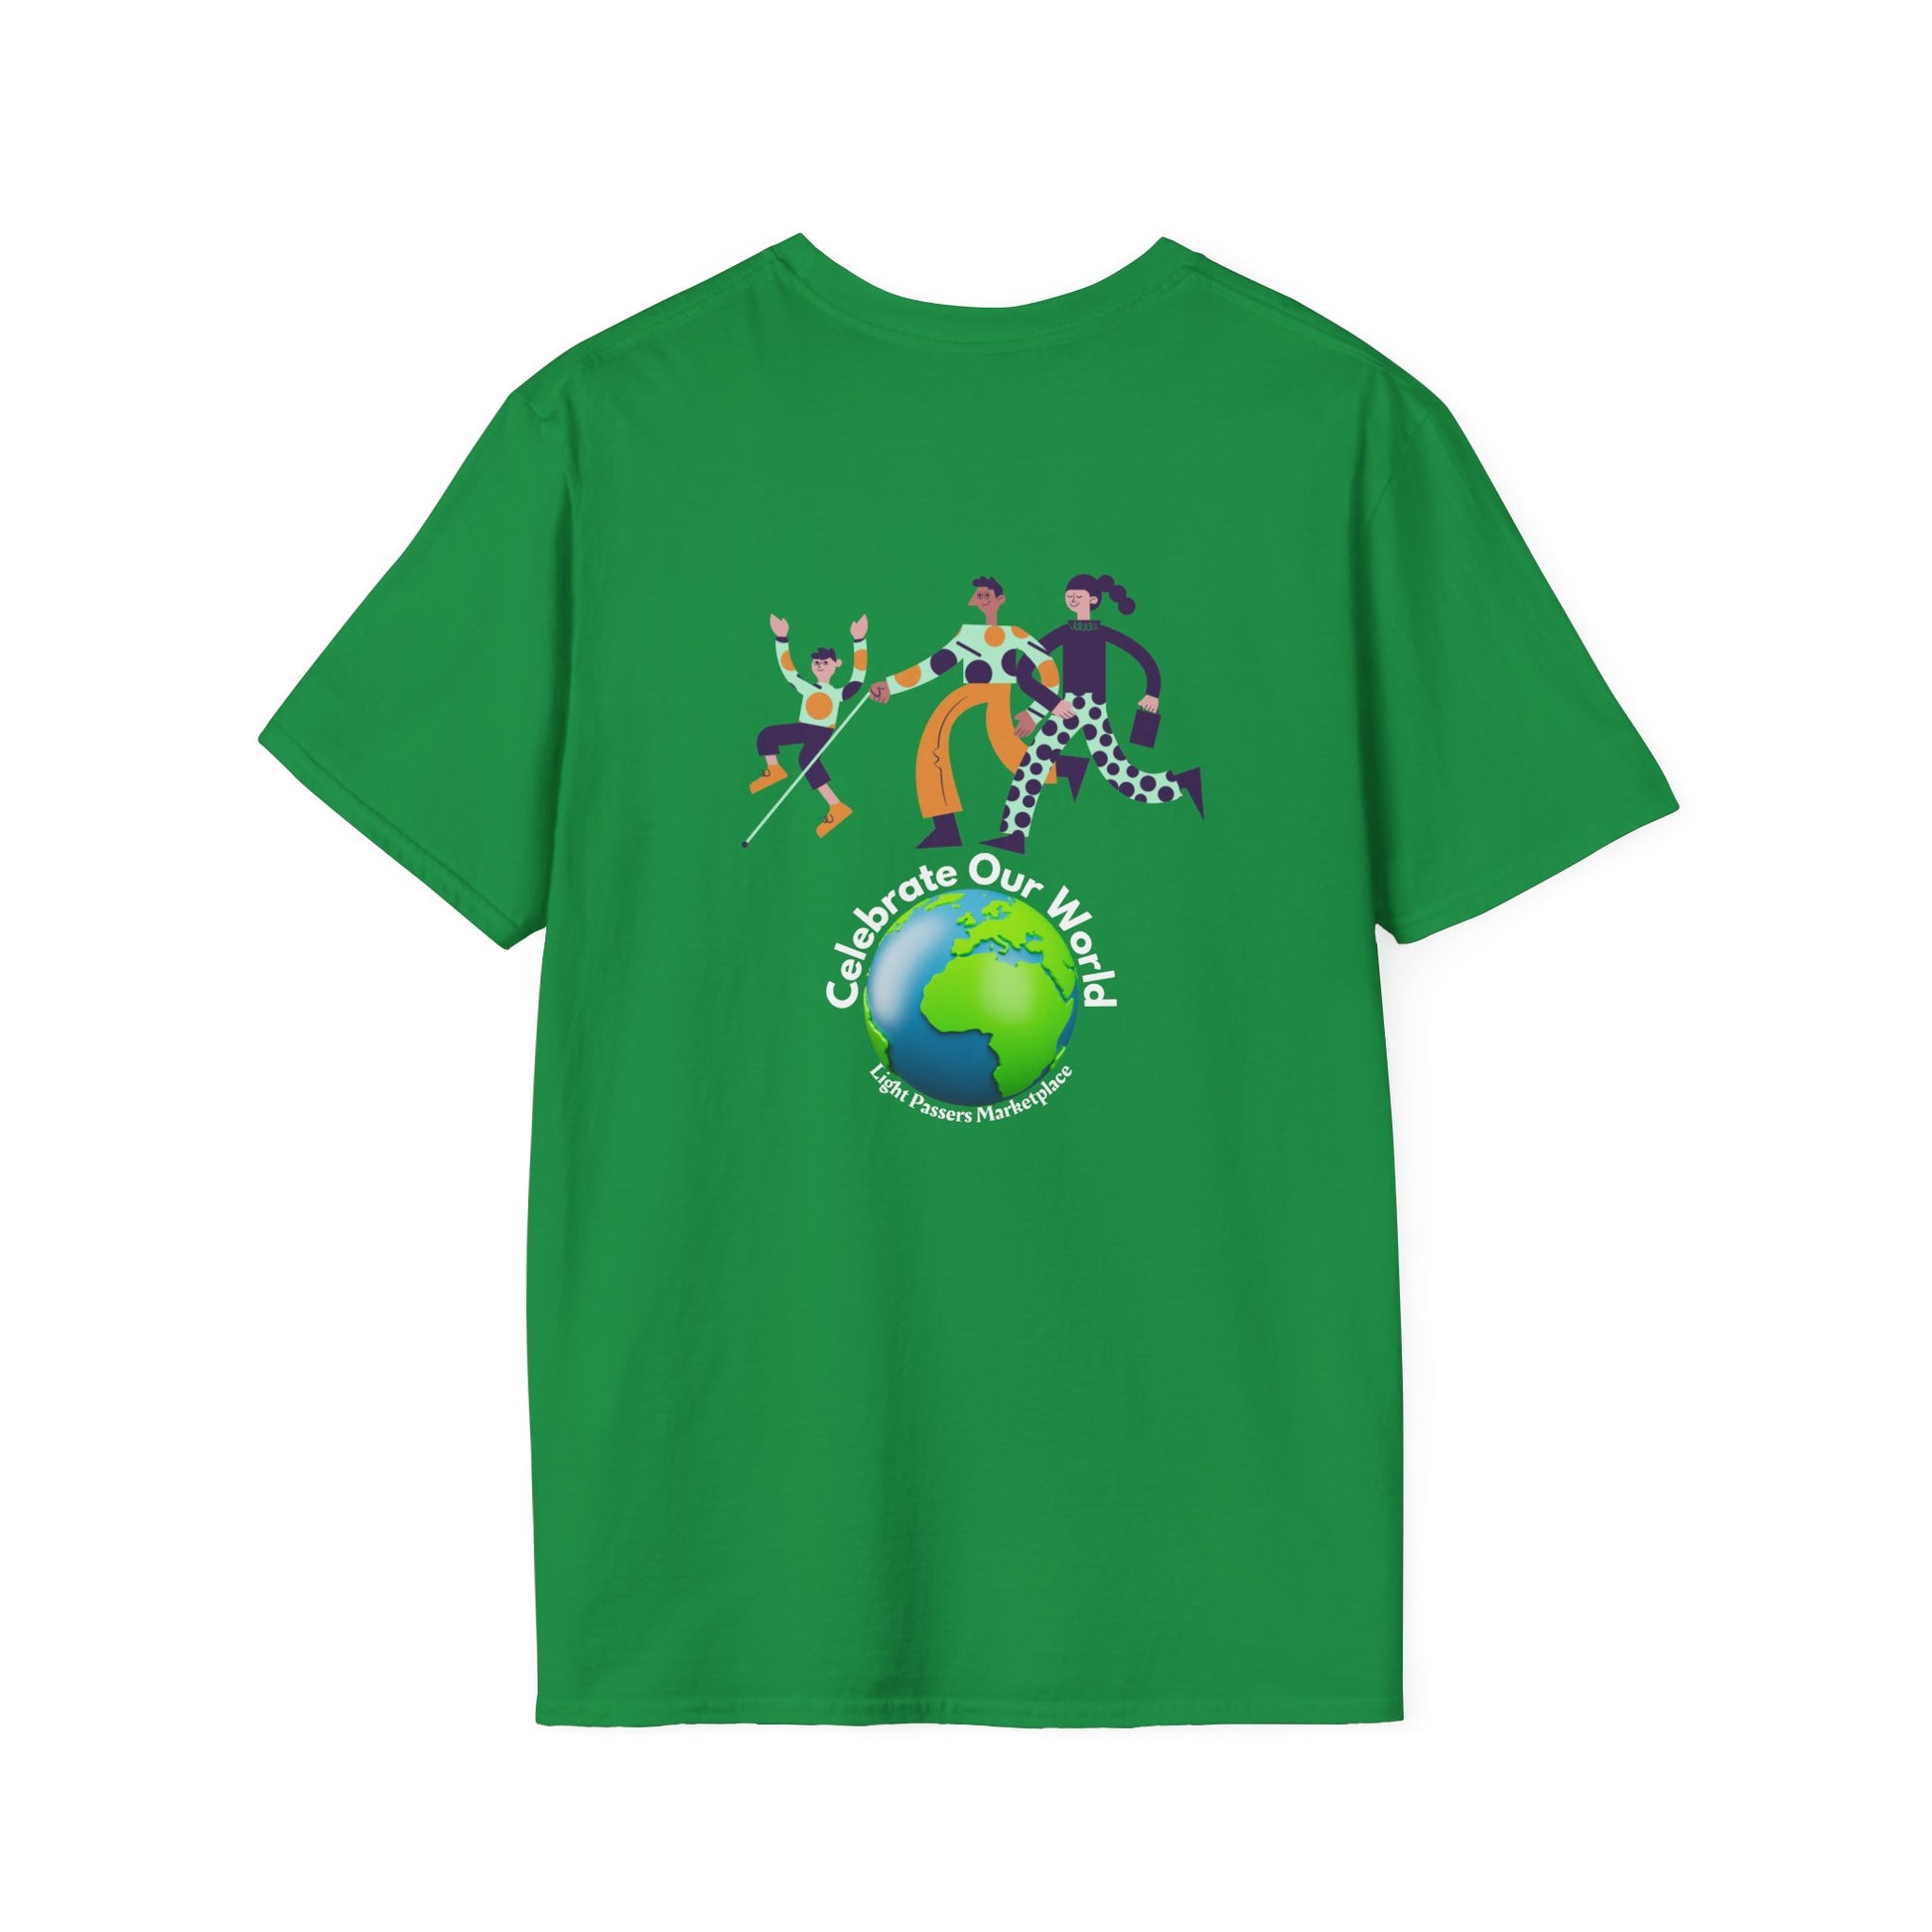 A green unisex t-shirt featuring a clown, globe, and people design. Made of soft 100% ring-spun cotton, with twill tape shoulders and ribbed collar. Ethically sourced and Oeko-Tex certified.